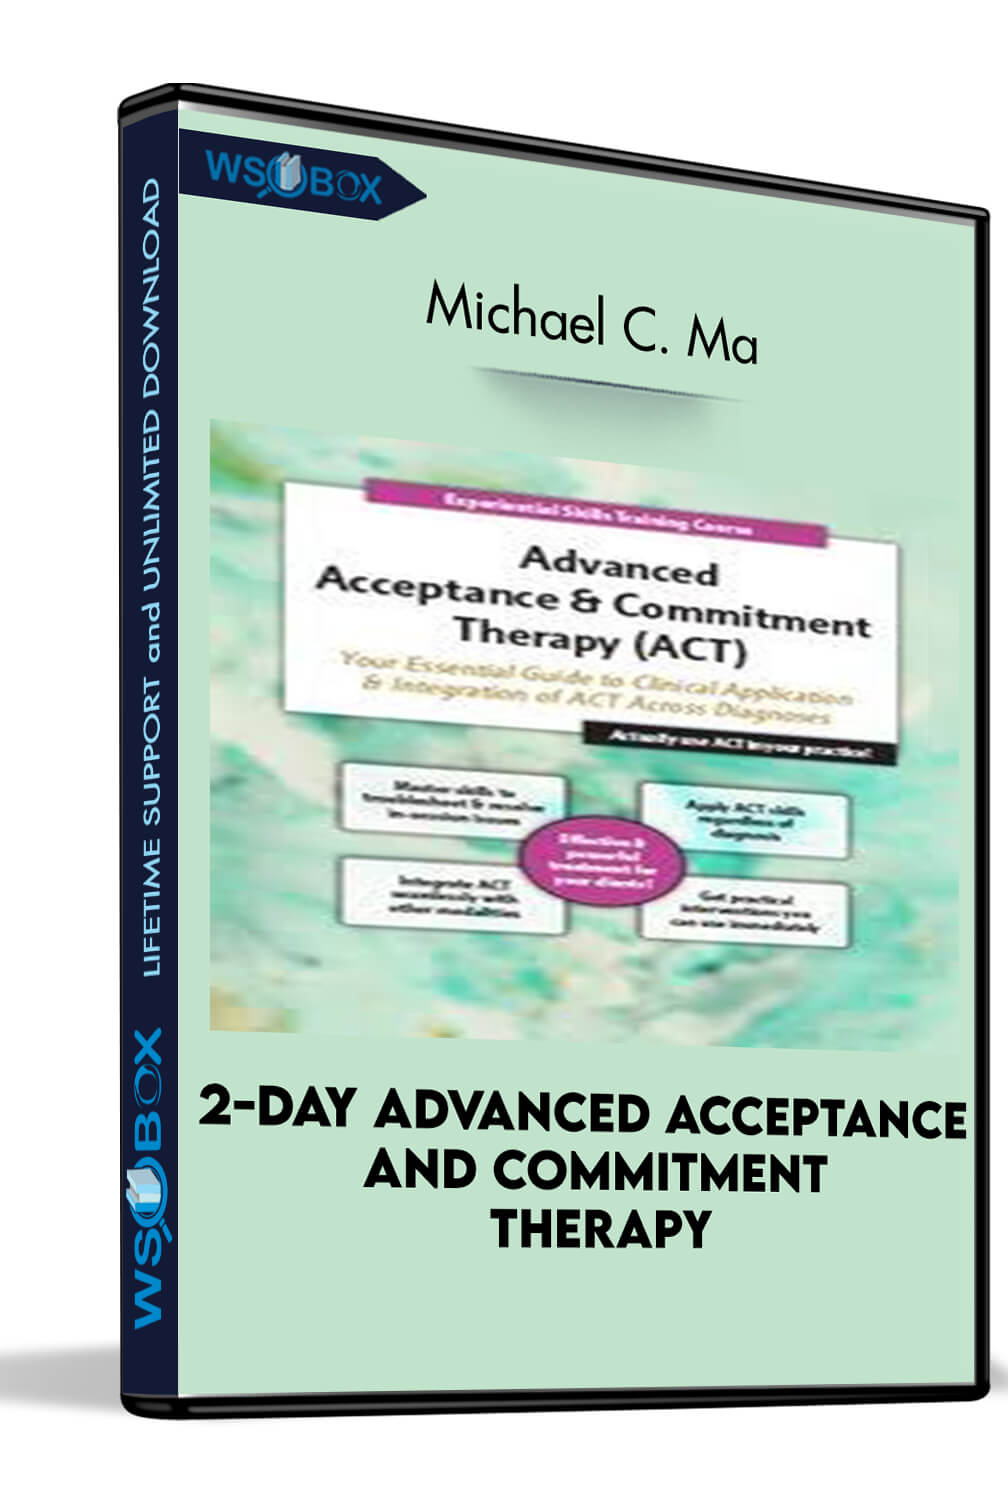 2-Day Advanced Acceptance and Commitment Therapy: Your Essential Guide to Clinical Application and Integration of ACT Across Diagnoses - Michael C. May